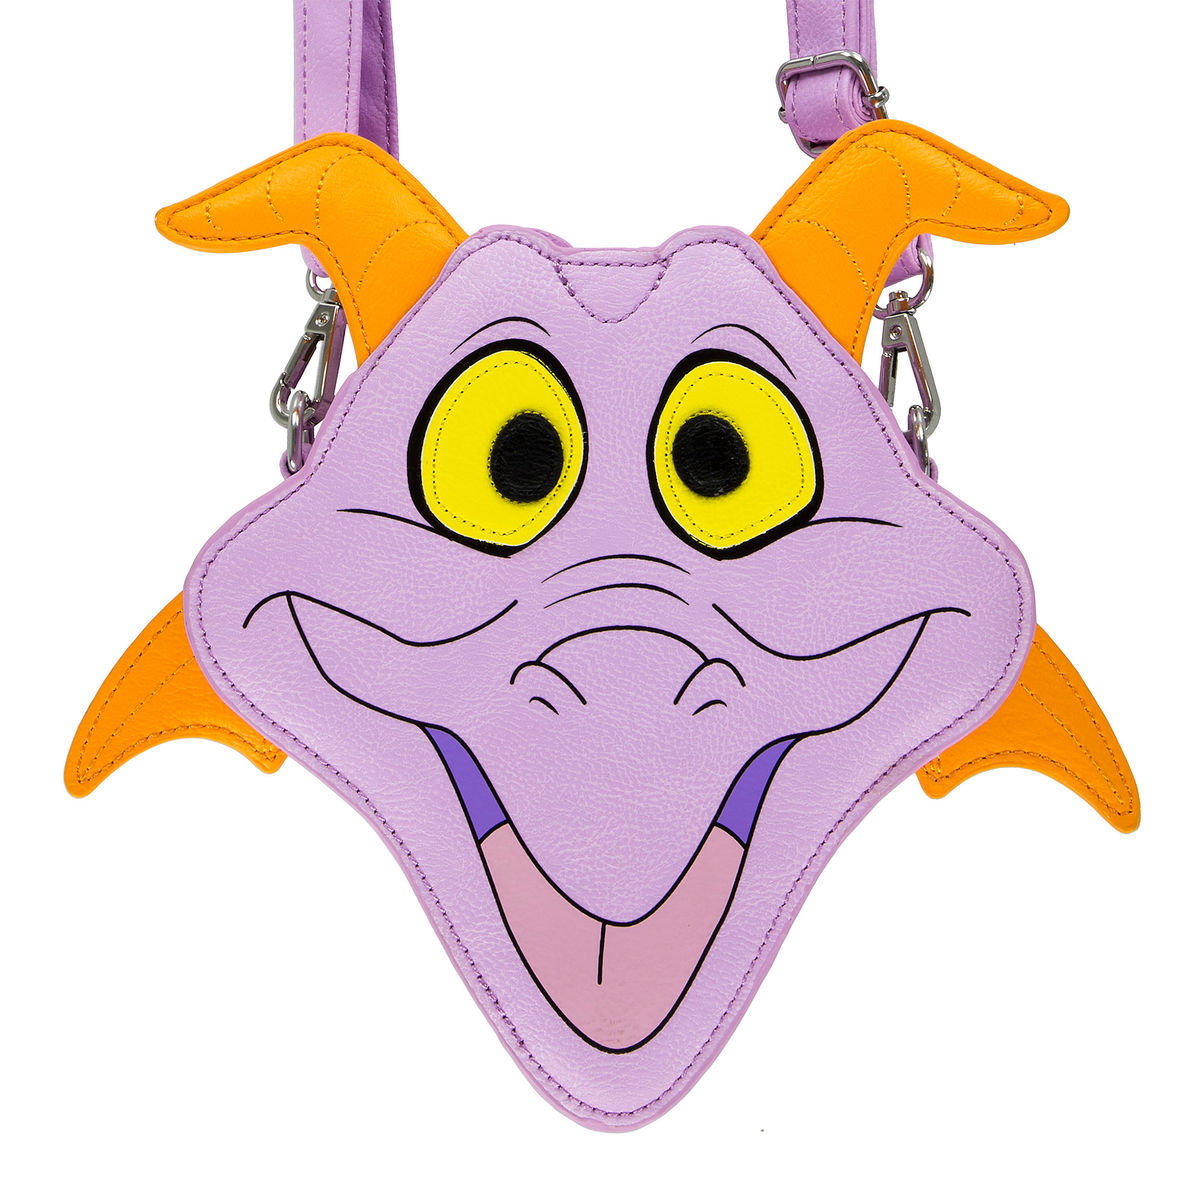 Disney Parks Figment Bag by Loungefly Journey Into Your Imagination New